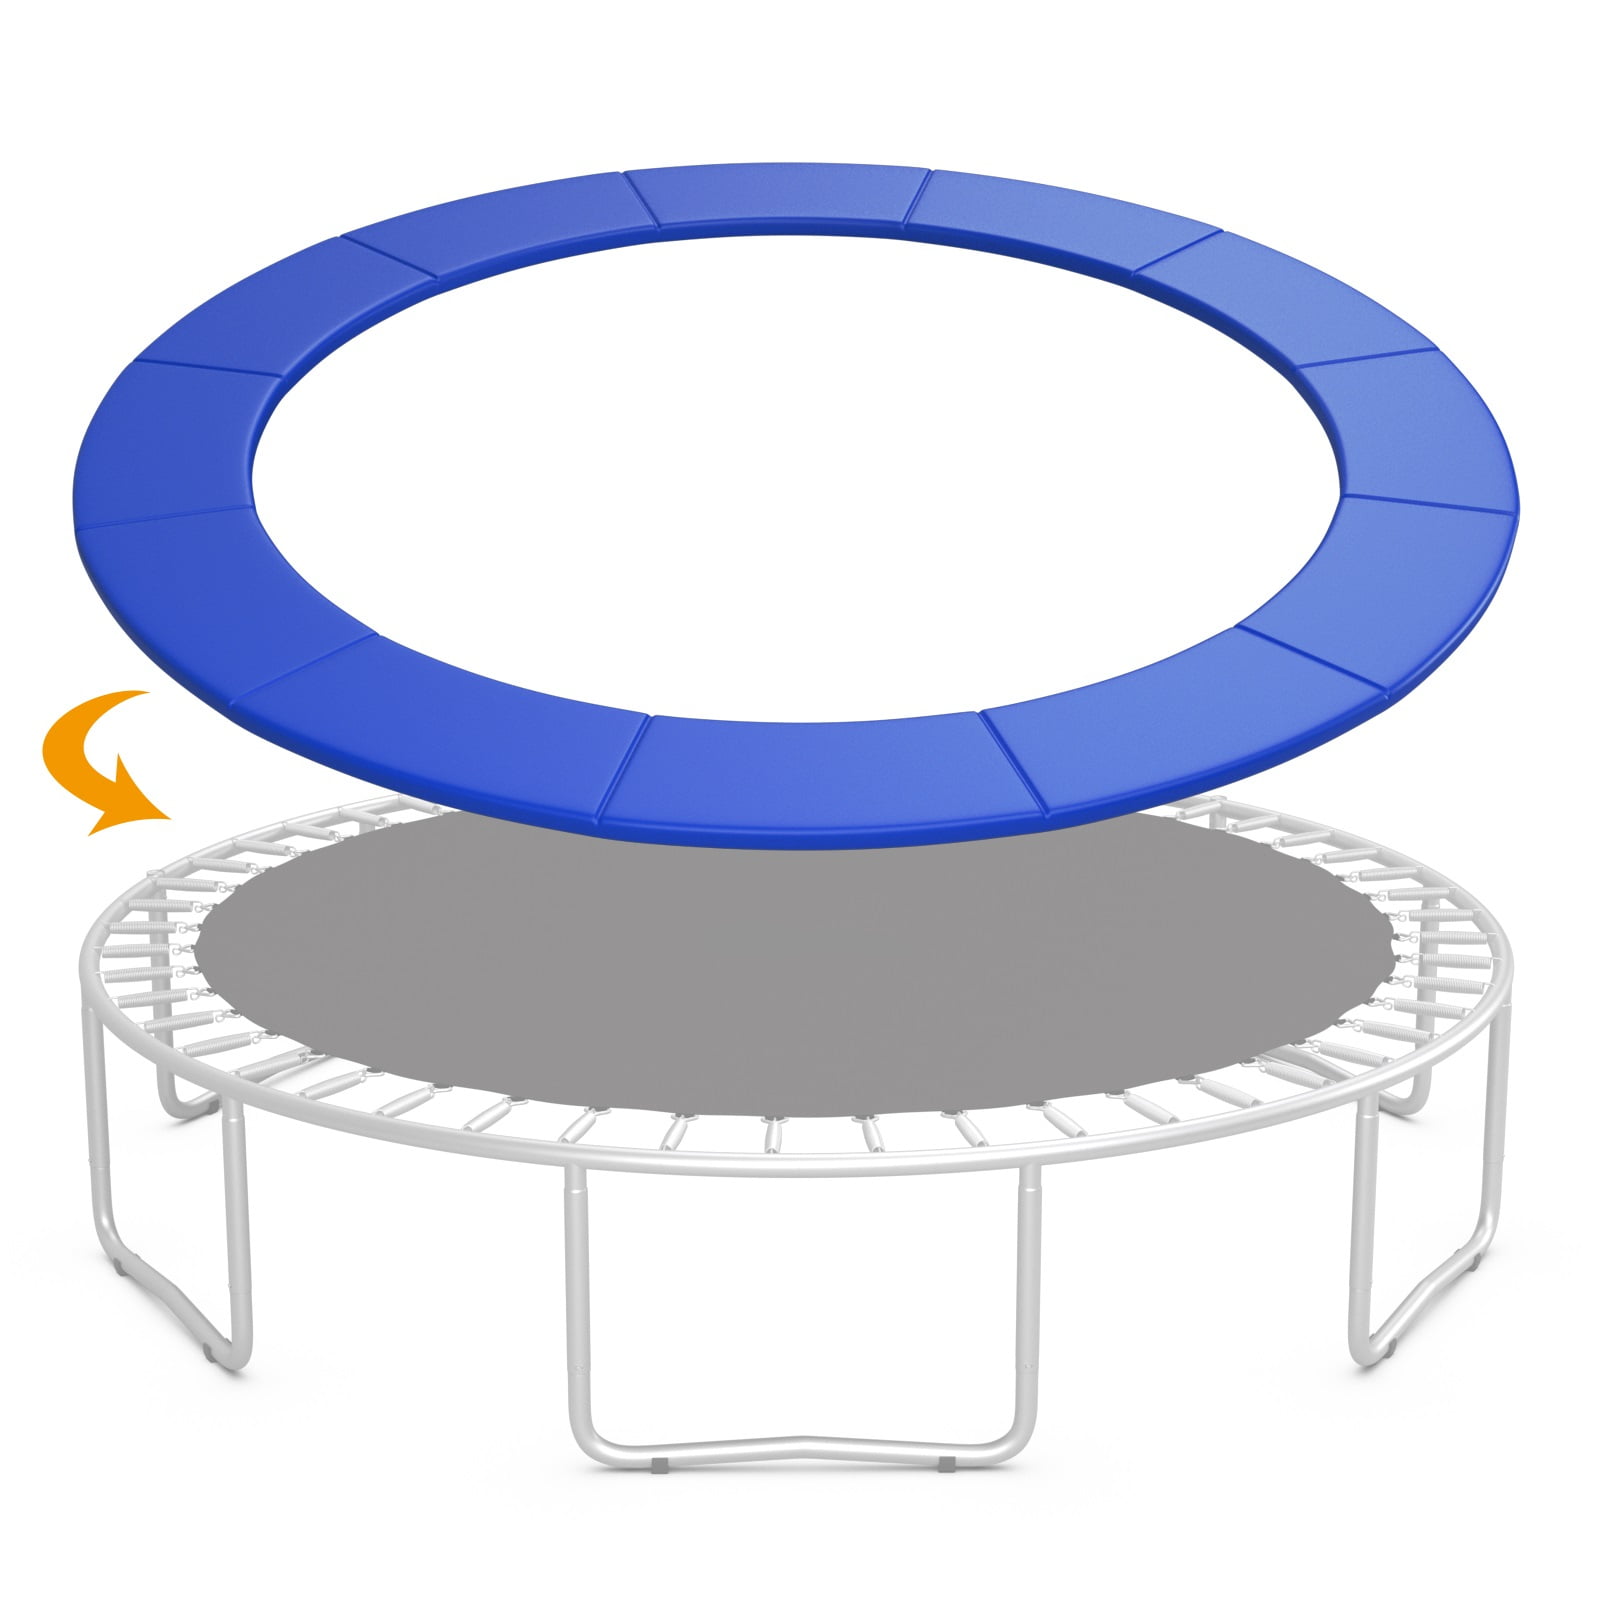 Premium Trampoline Spring Pad Better Protection Royal Blue or Green Colors More Durable Double Standard Thickness Foam & PVC 